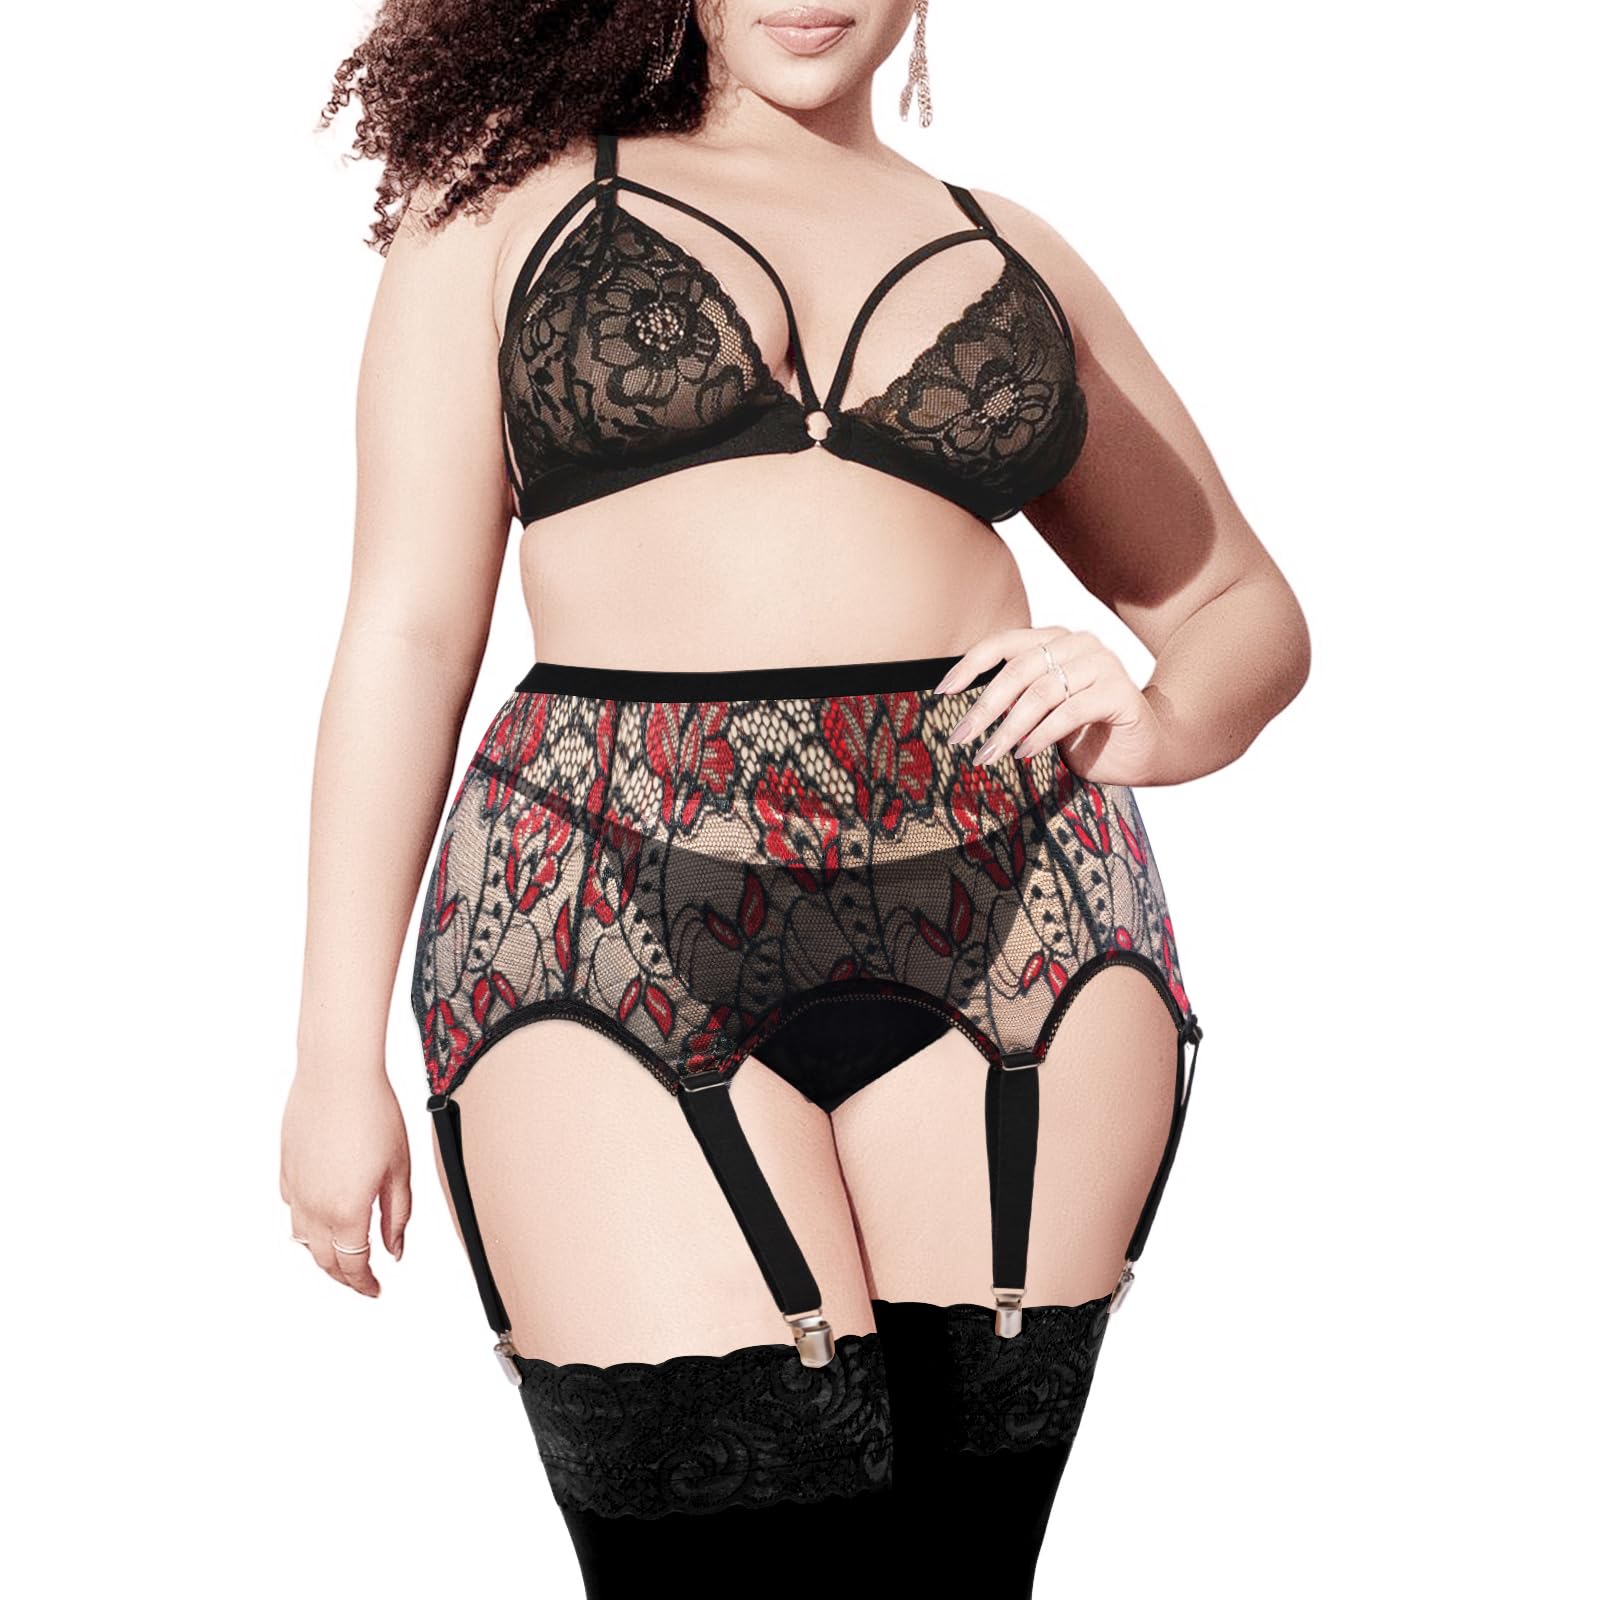 Garter Belt Plus Size High Waist with 6 Vintage Metal Clips - Black & Red Lace - Moon Wood